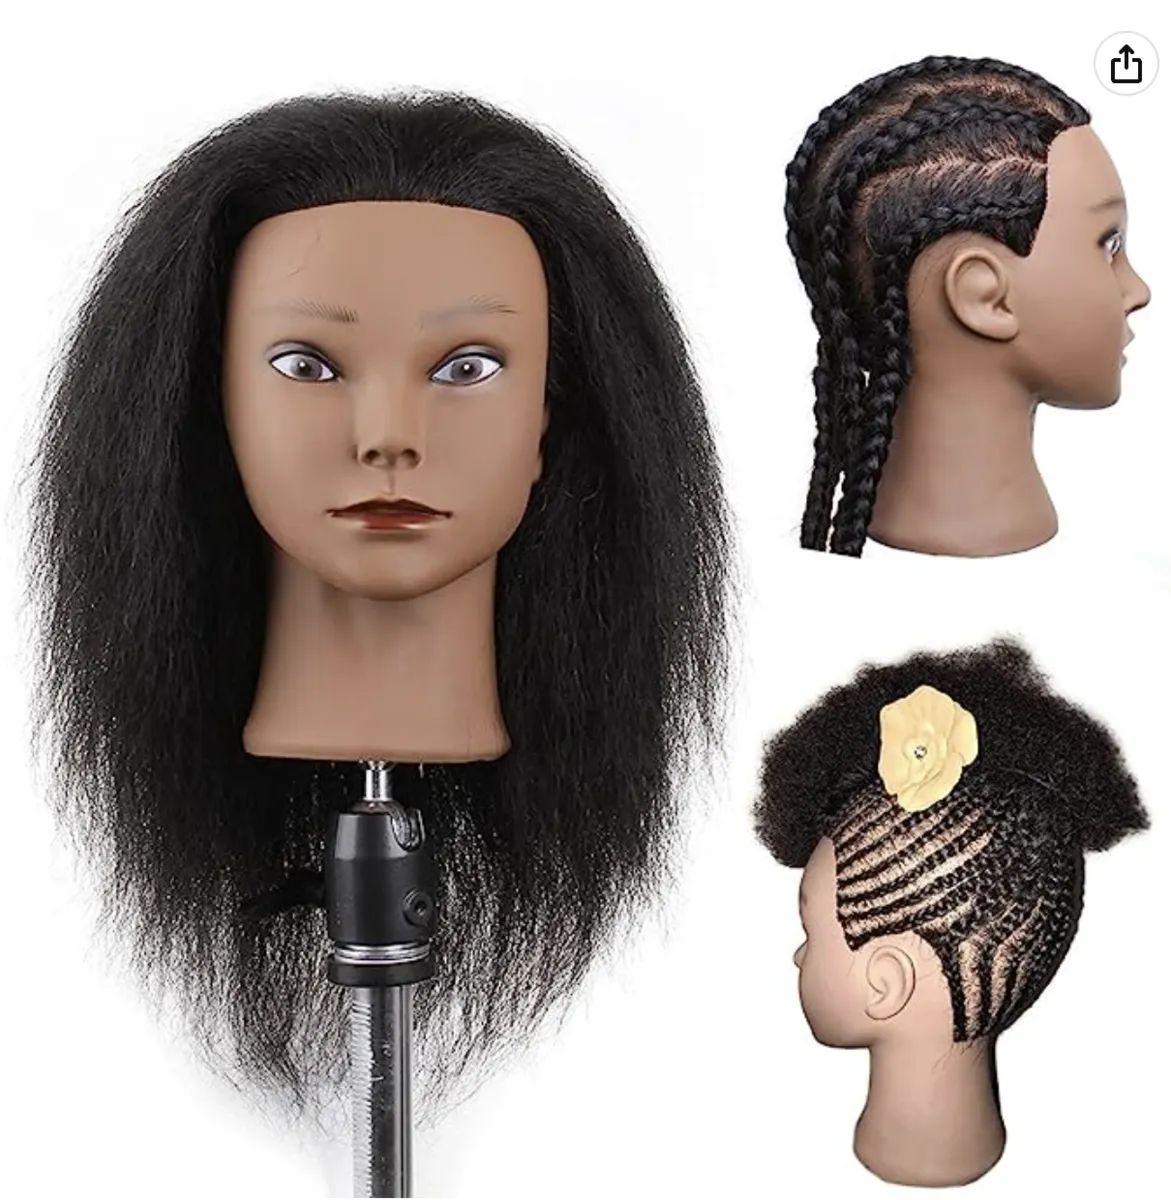 Mannequin Head With Real Human Hair for Hairdresser Training Styling  Braiding